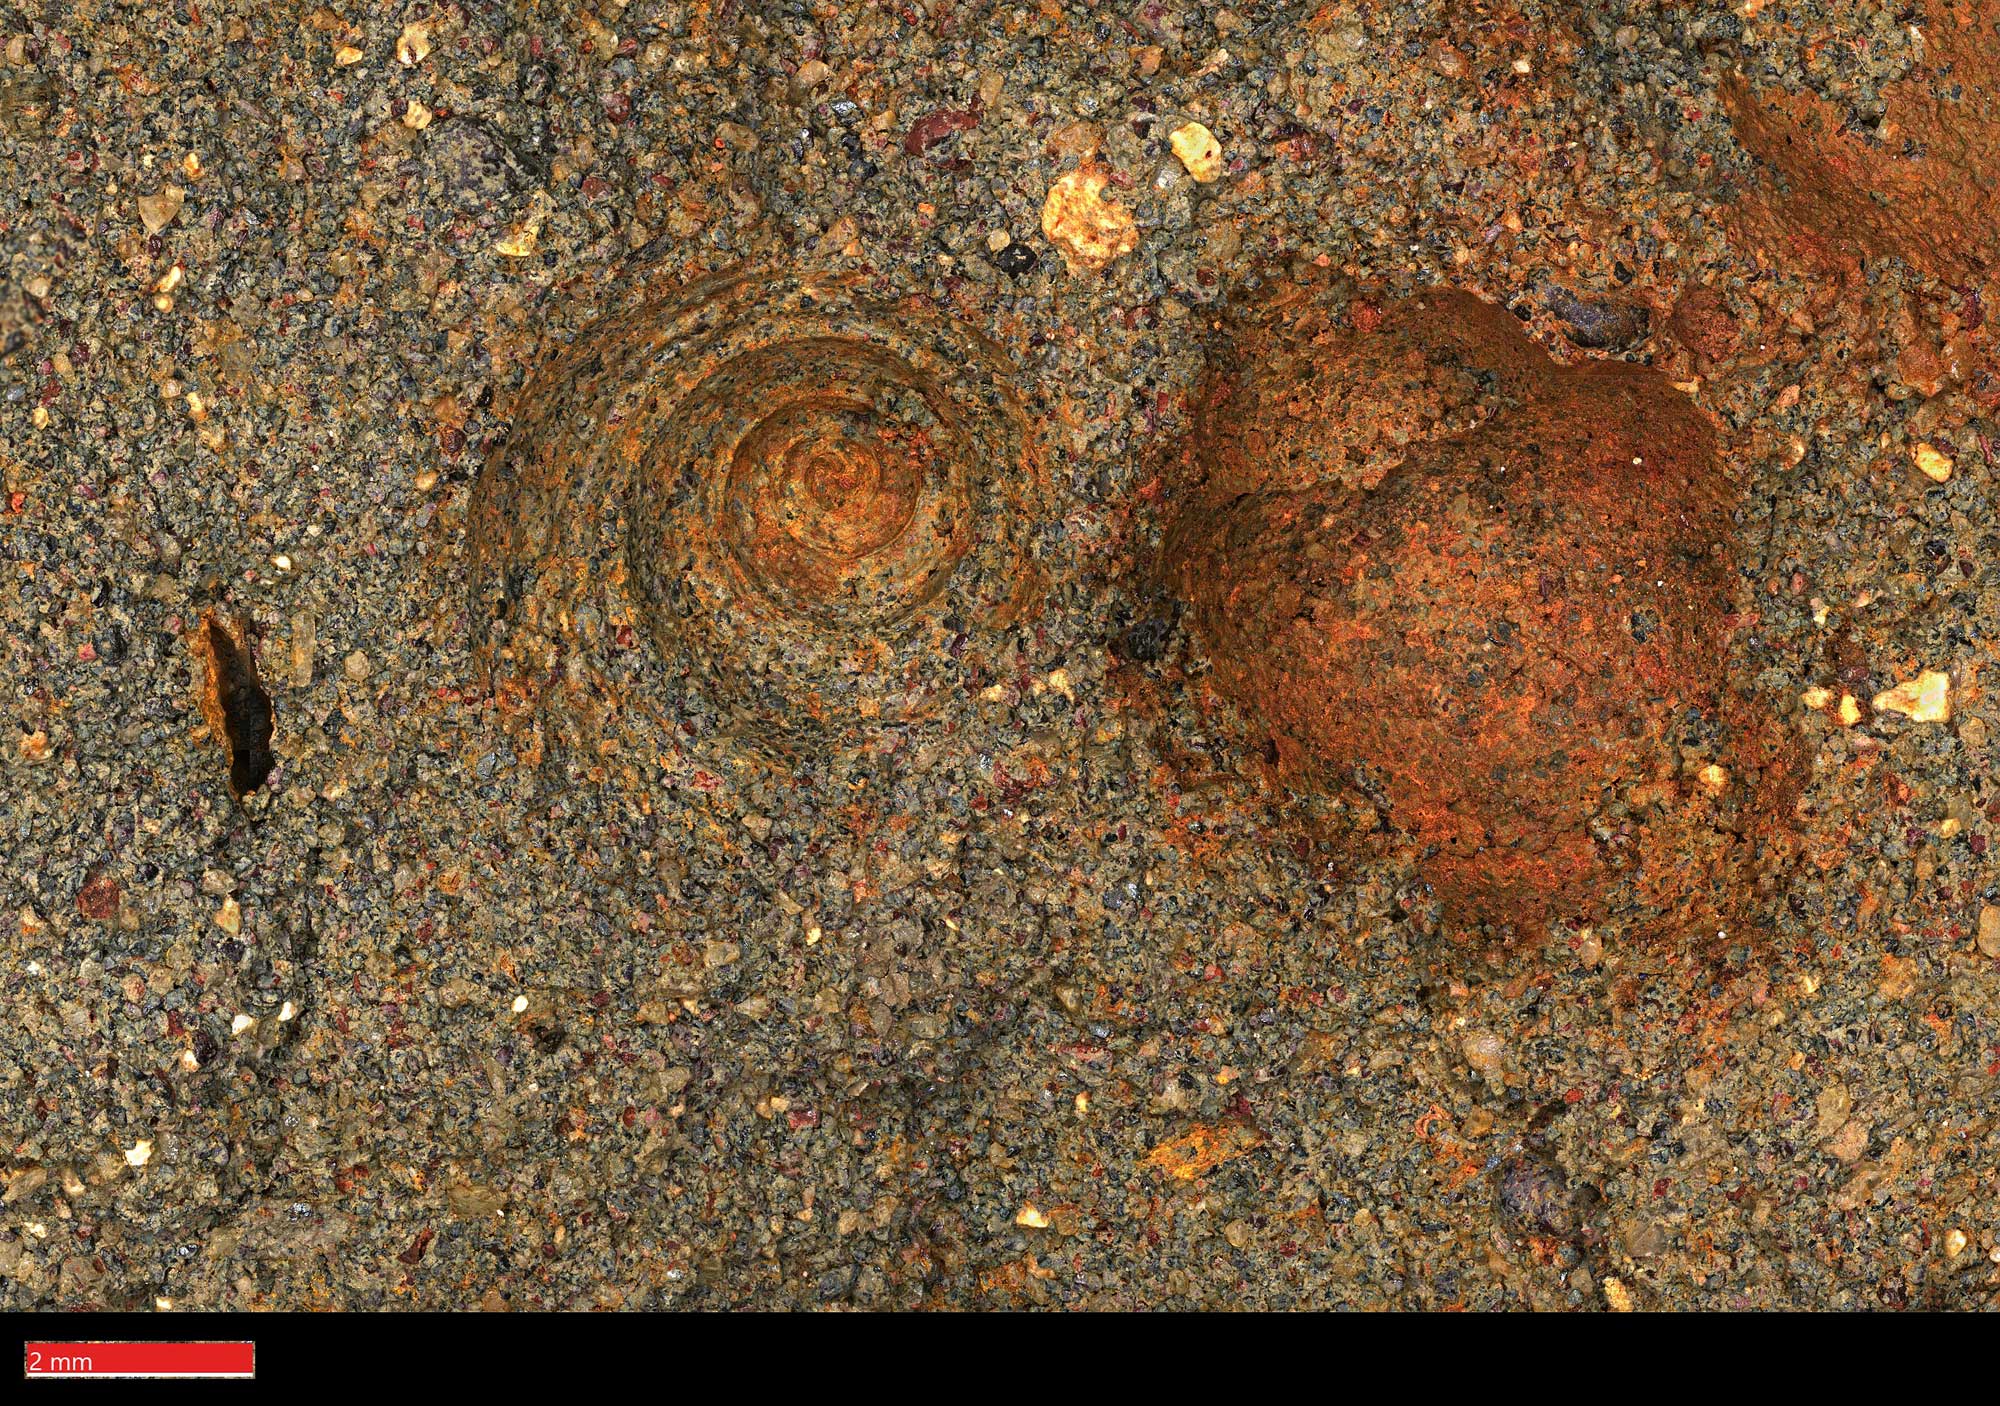 Photograph of Late Cretaceous gastropods from the Mesabi Iron Range, Minnesota. The photo shows two gastropod (snail) shells, one viewed from the apex so that looks like a spiral, and one from the side. The shells are orange in color and do not appear well preserved. The rock matrix around them is brown and appears coarse-grained.